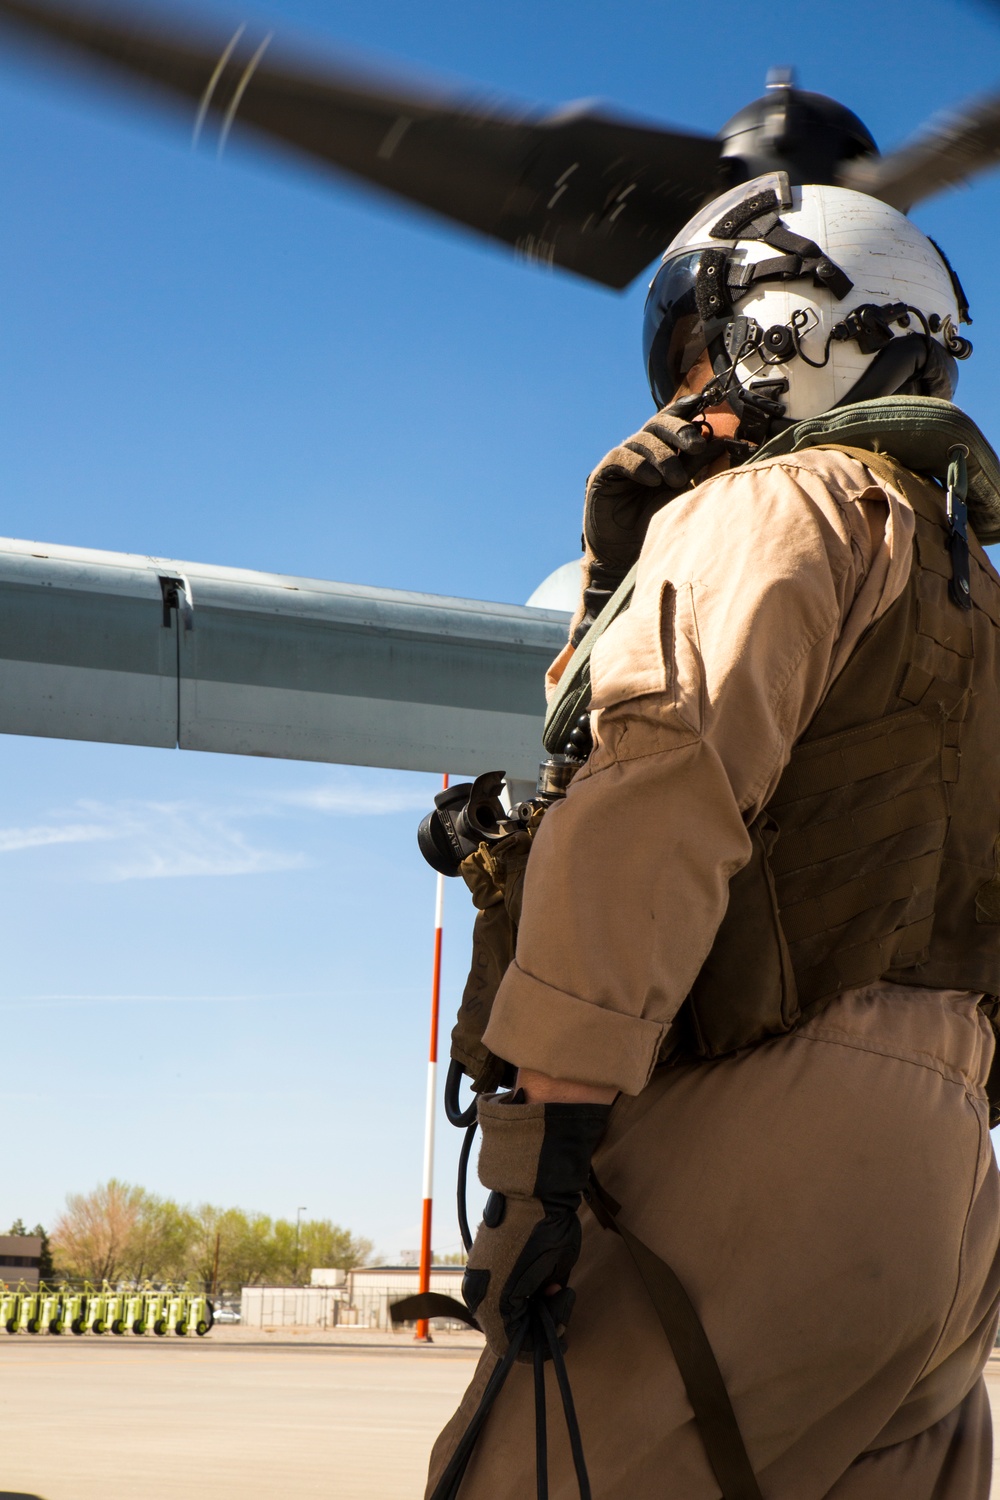 VMX-22 tests new software in New Mexico